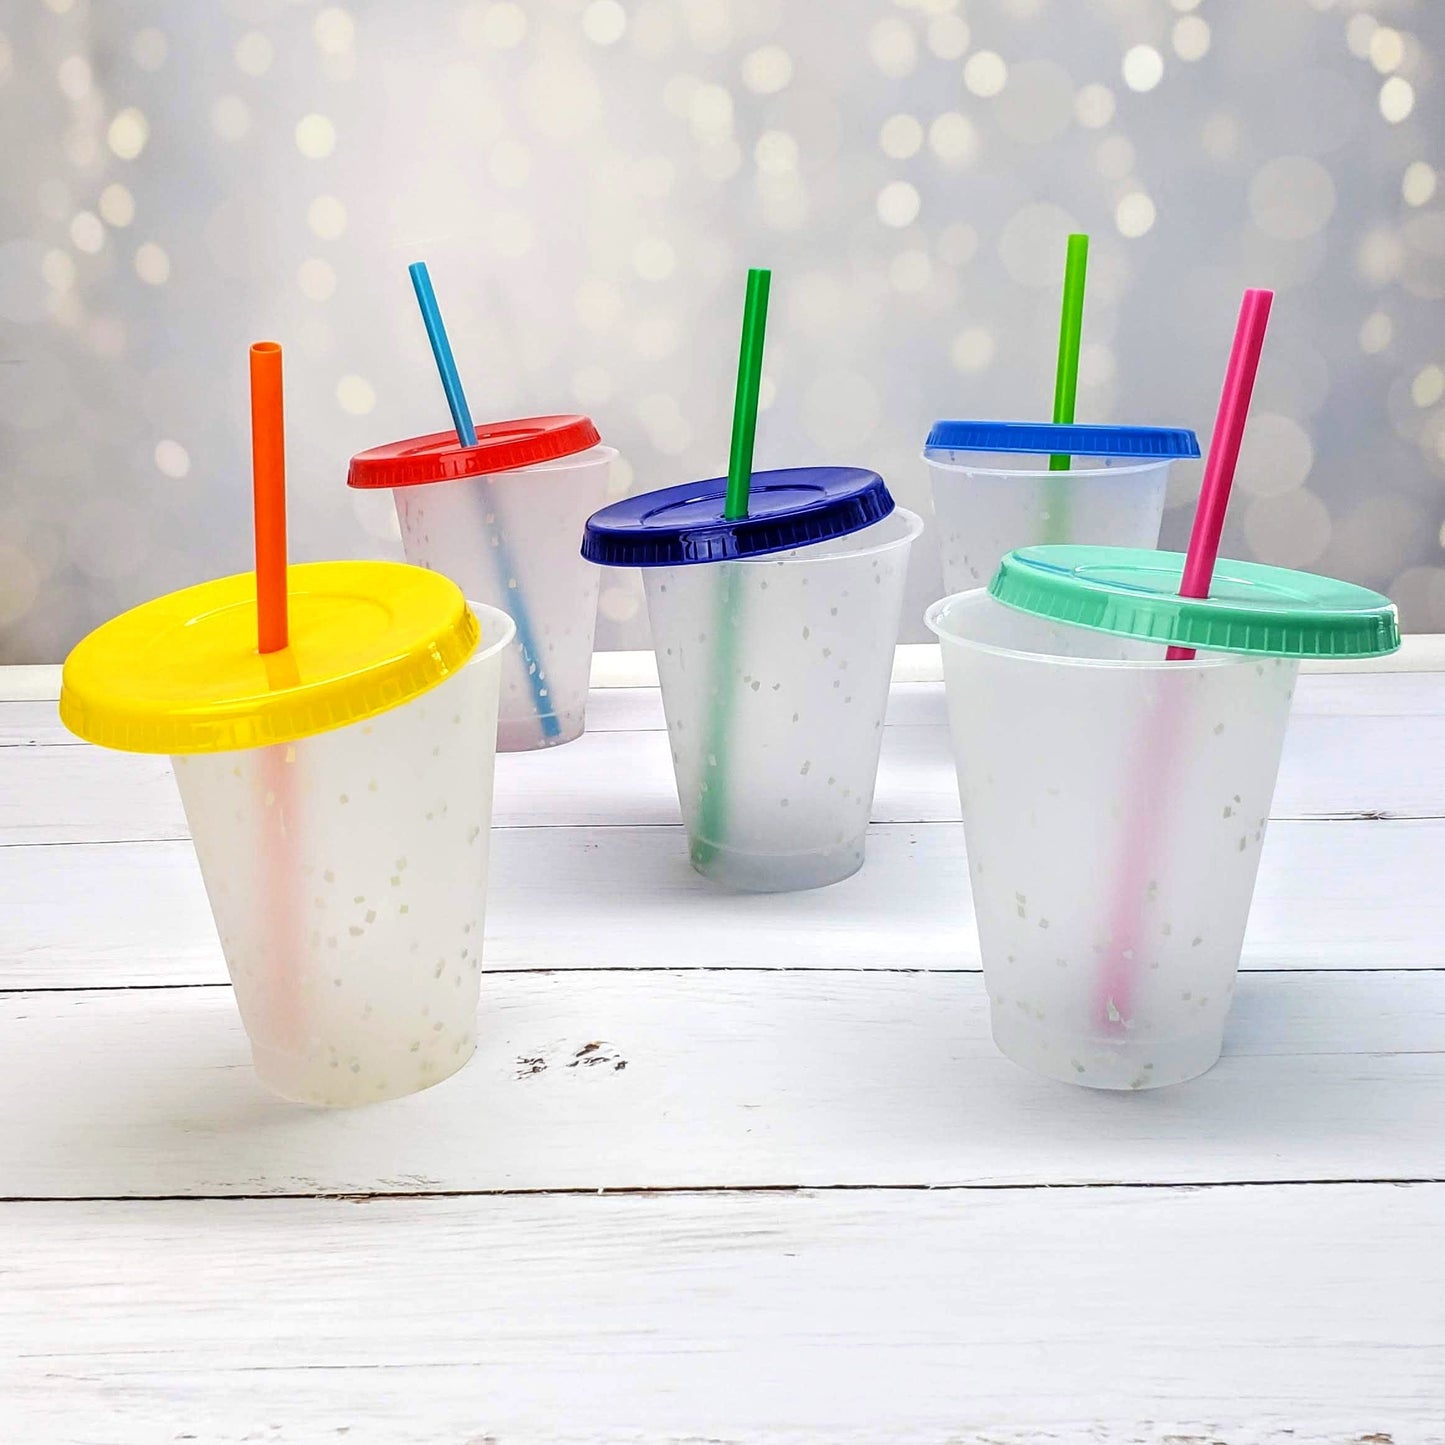 Set of 5 Color Changing Kids Cups with Colored Straws - 16oz Mini